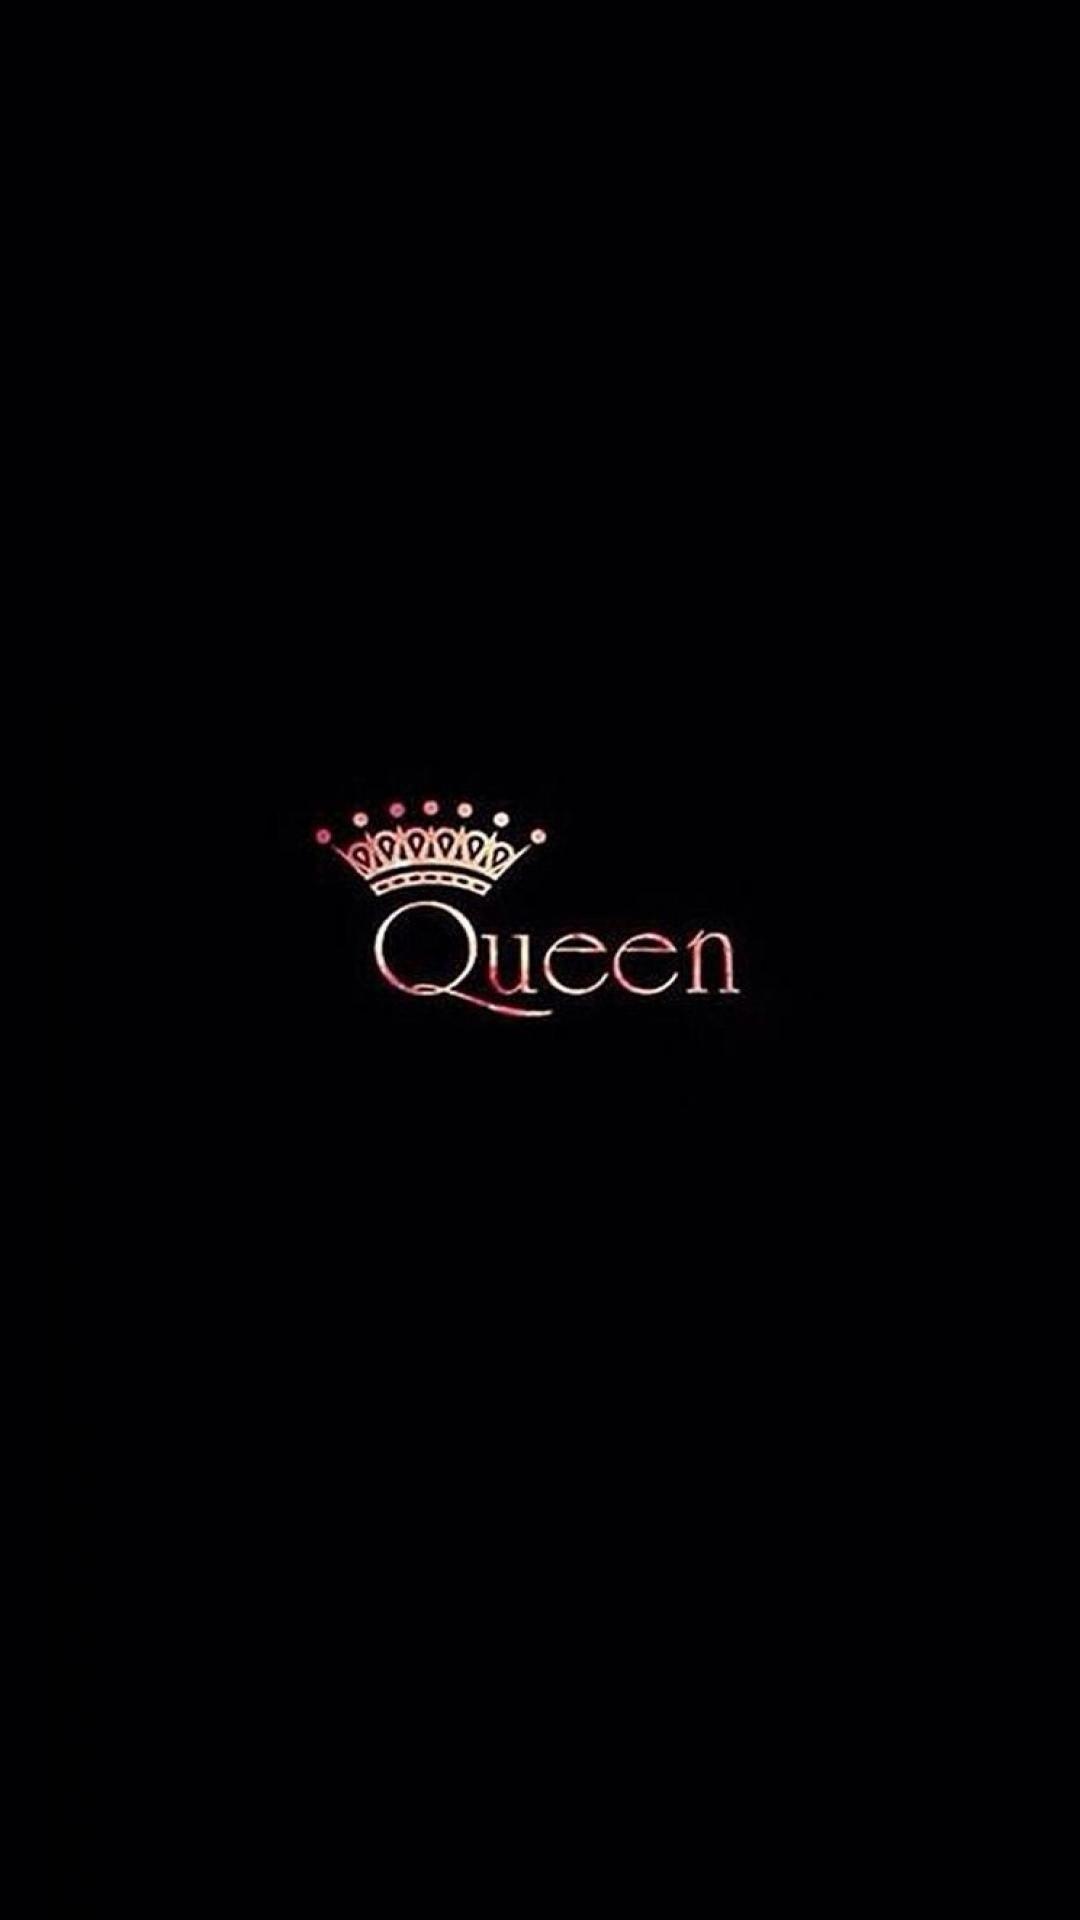 King and queen logos iphone wallpapers